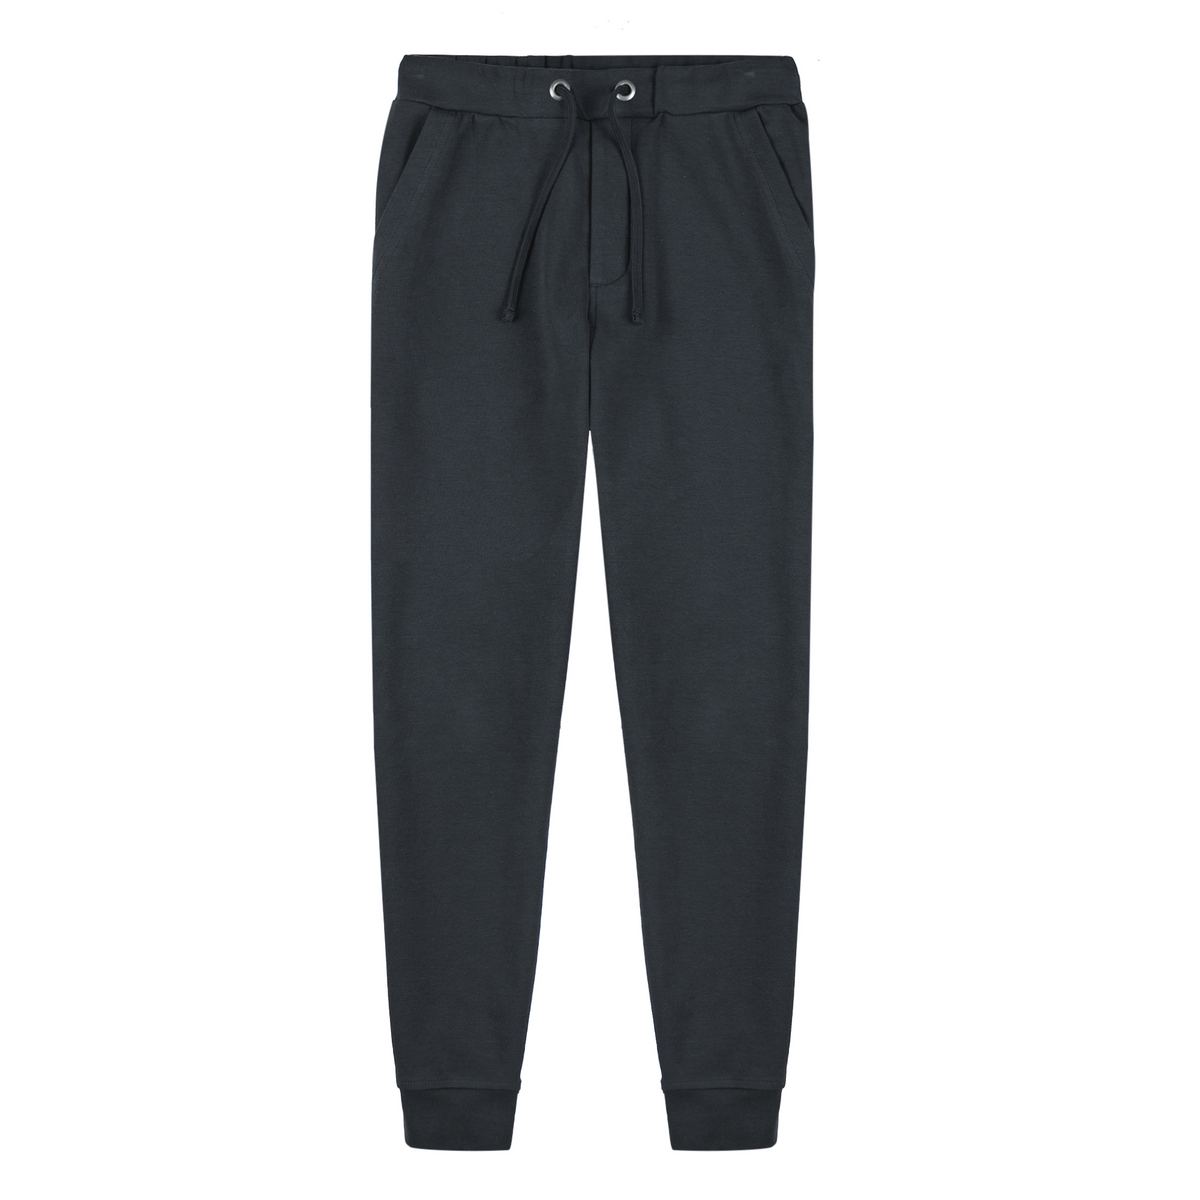 All Day Sweatpants, Black | Peter Manning NYC